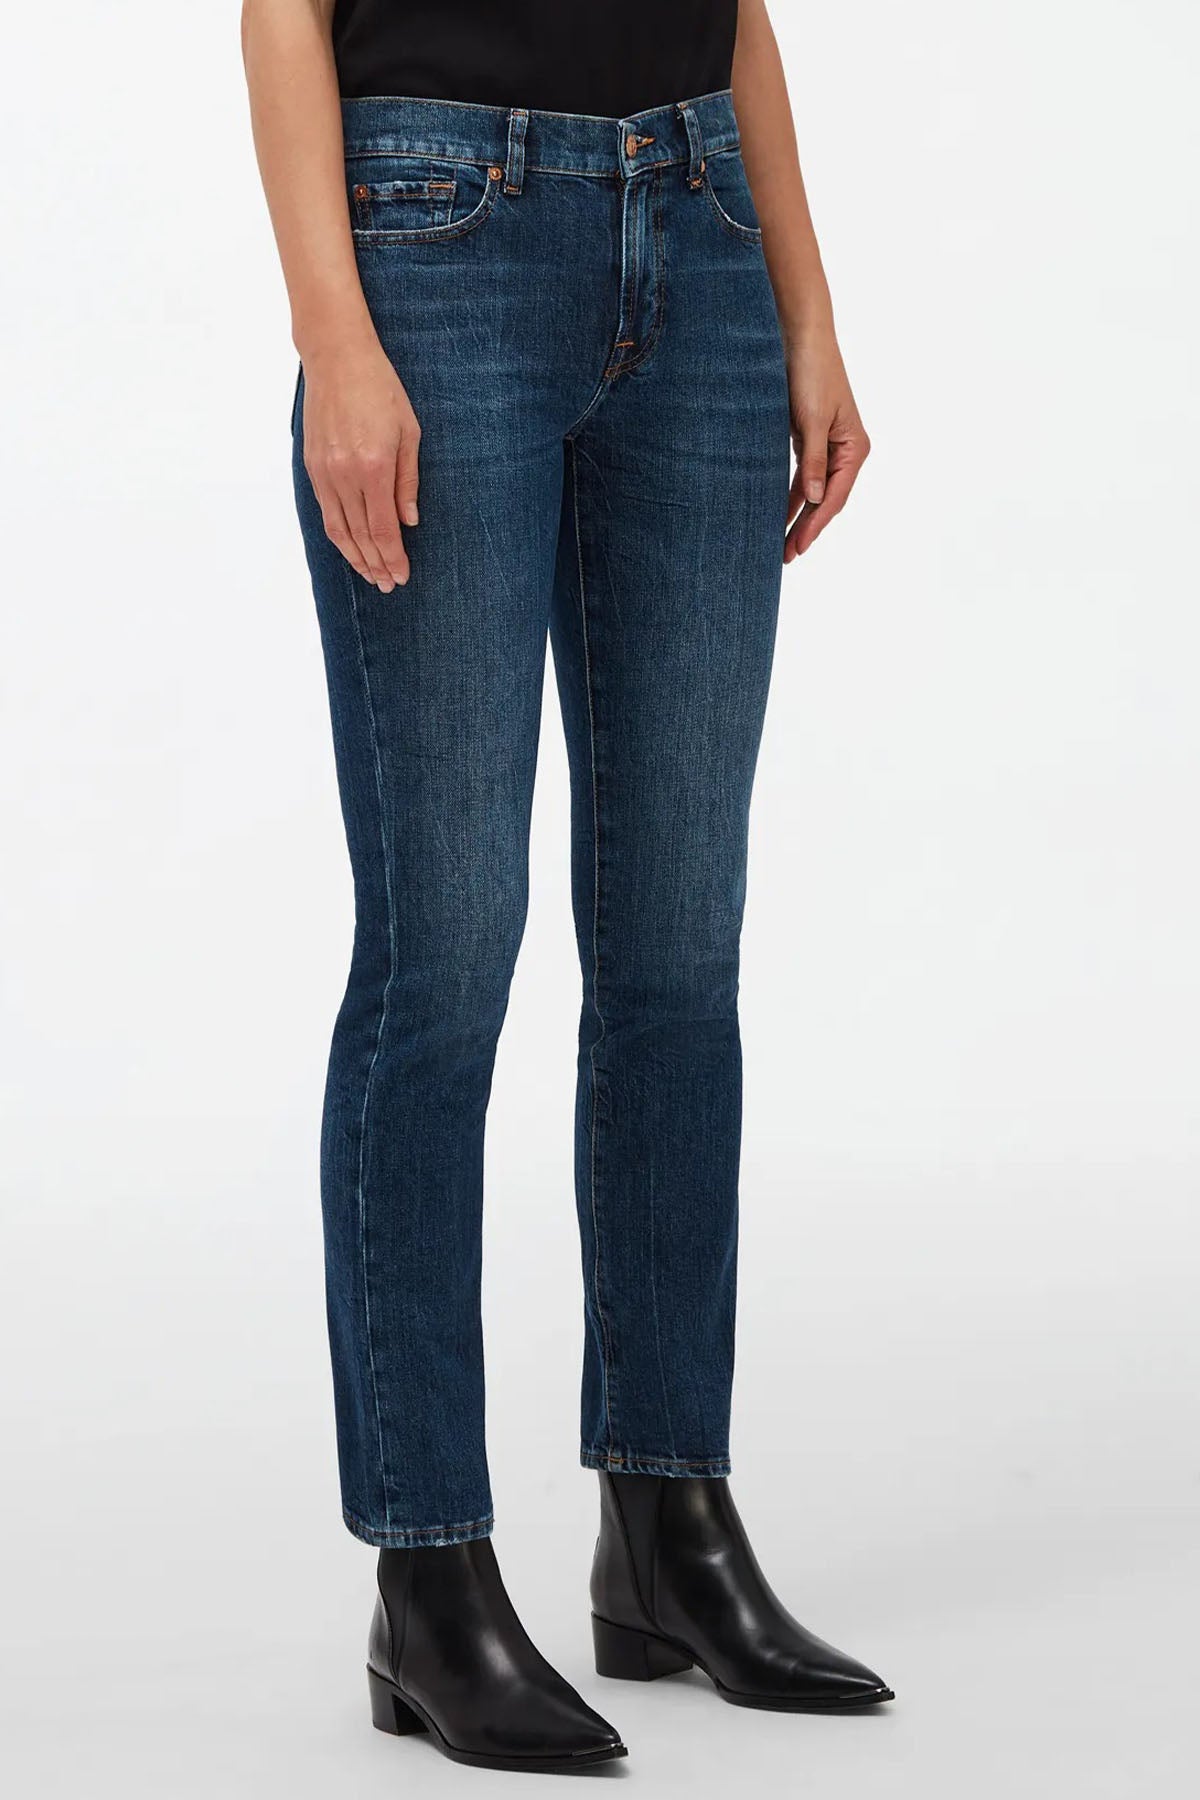 7 For All Mankind Roxanne Slim Fit Jeans-Libas Trendy Fashion Store